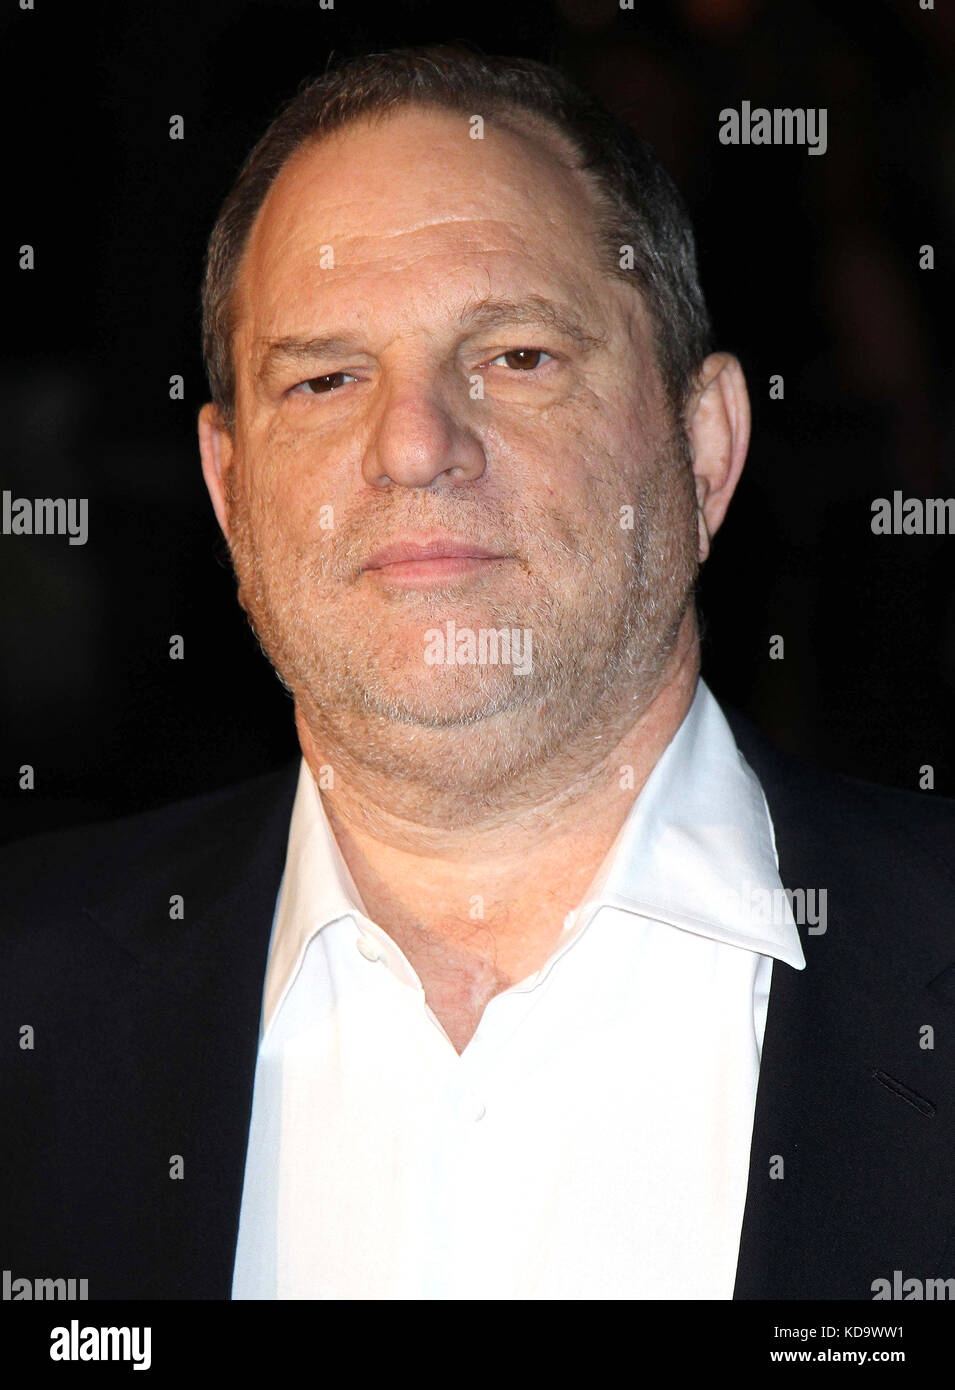 Harvey Weinstein The King's Speech Premiere BFI London Film Festival, Odeon Cinema, Leicester Square, London, UK, 21 October 2010: For piQtured Sales contact: Ian@Piqtured.com +44(0)791 626 2580 (picture by Richard Goldschmidt) Stock Photo